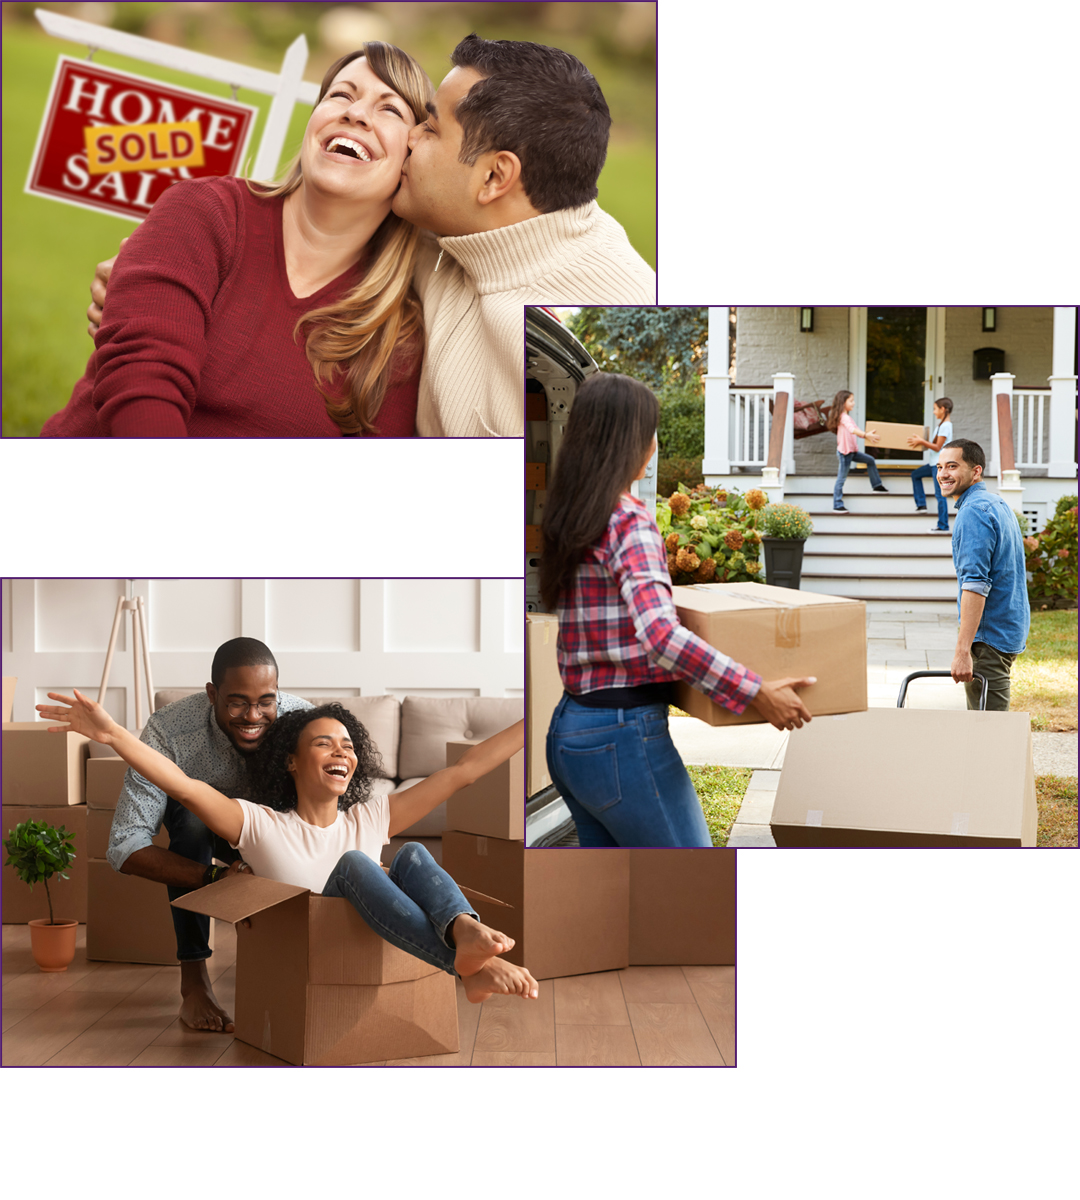 collage of photos depicting the New Homeowner person